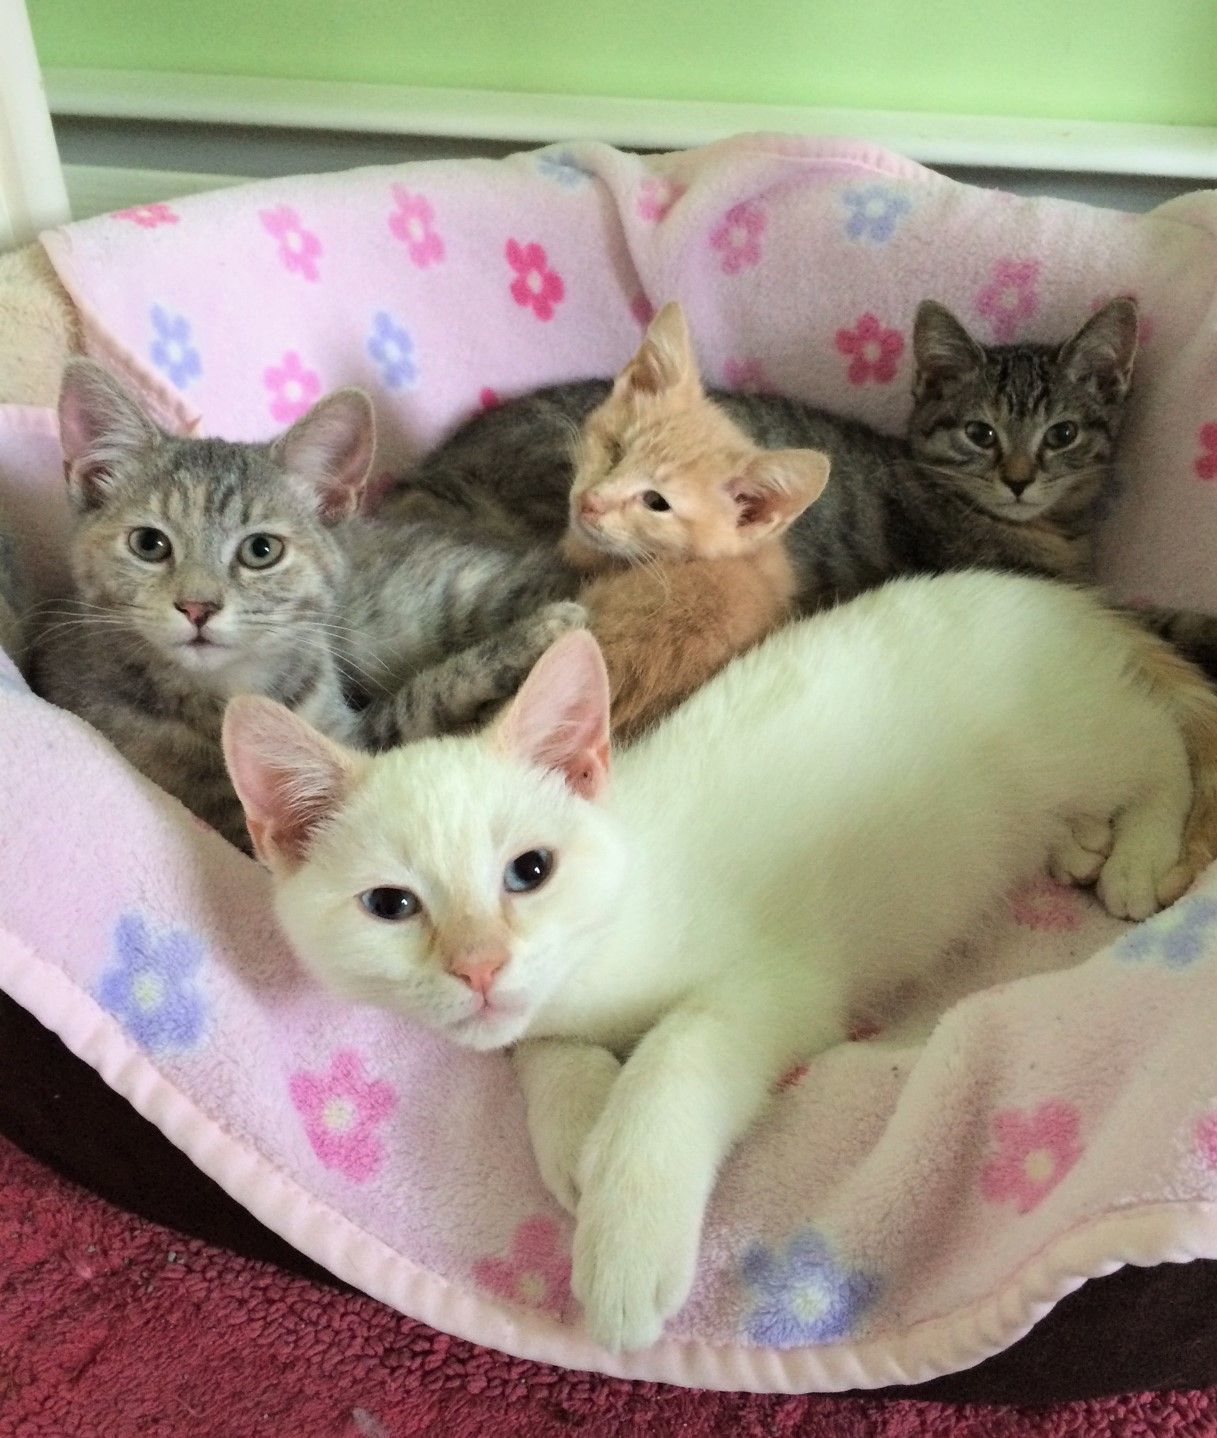 Buttercup, Her Babies, and the Beauty of Fostering